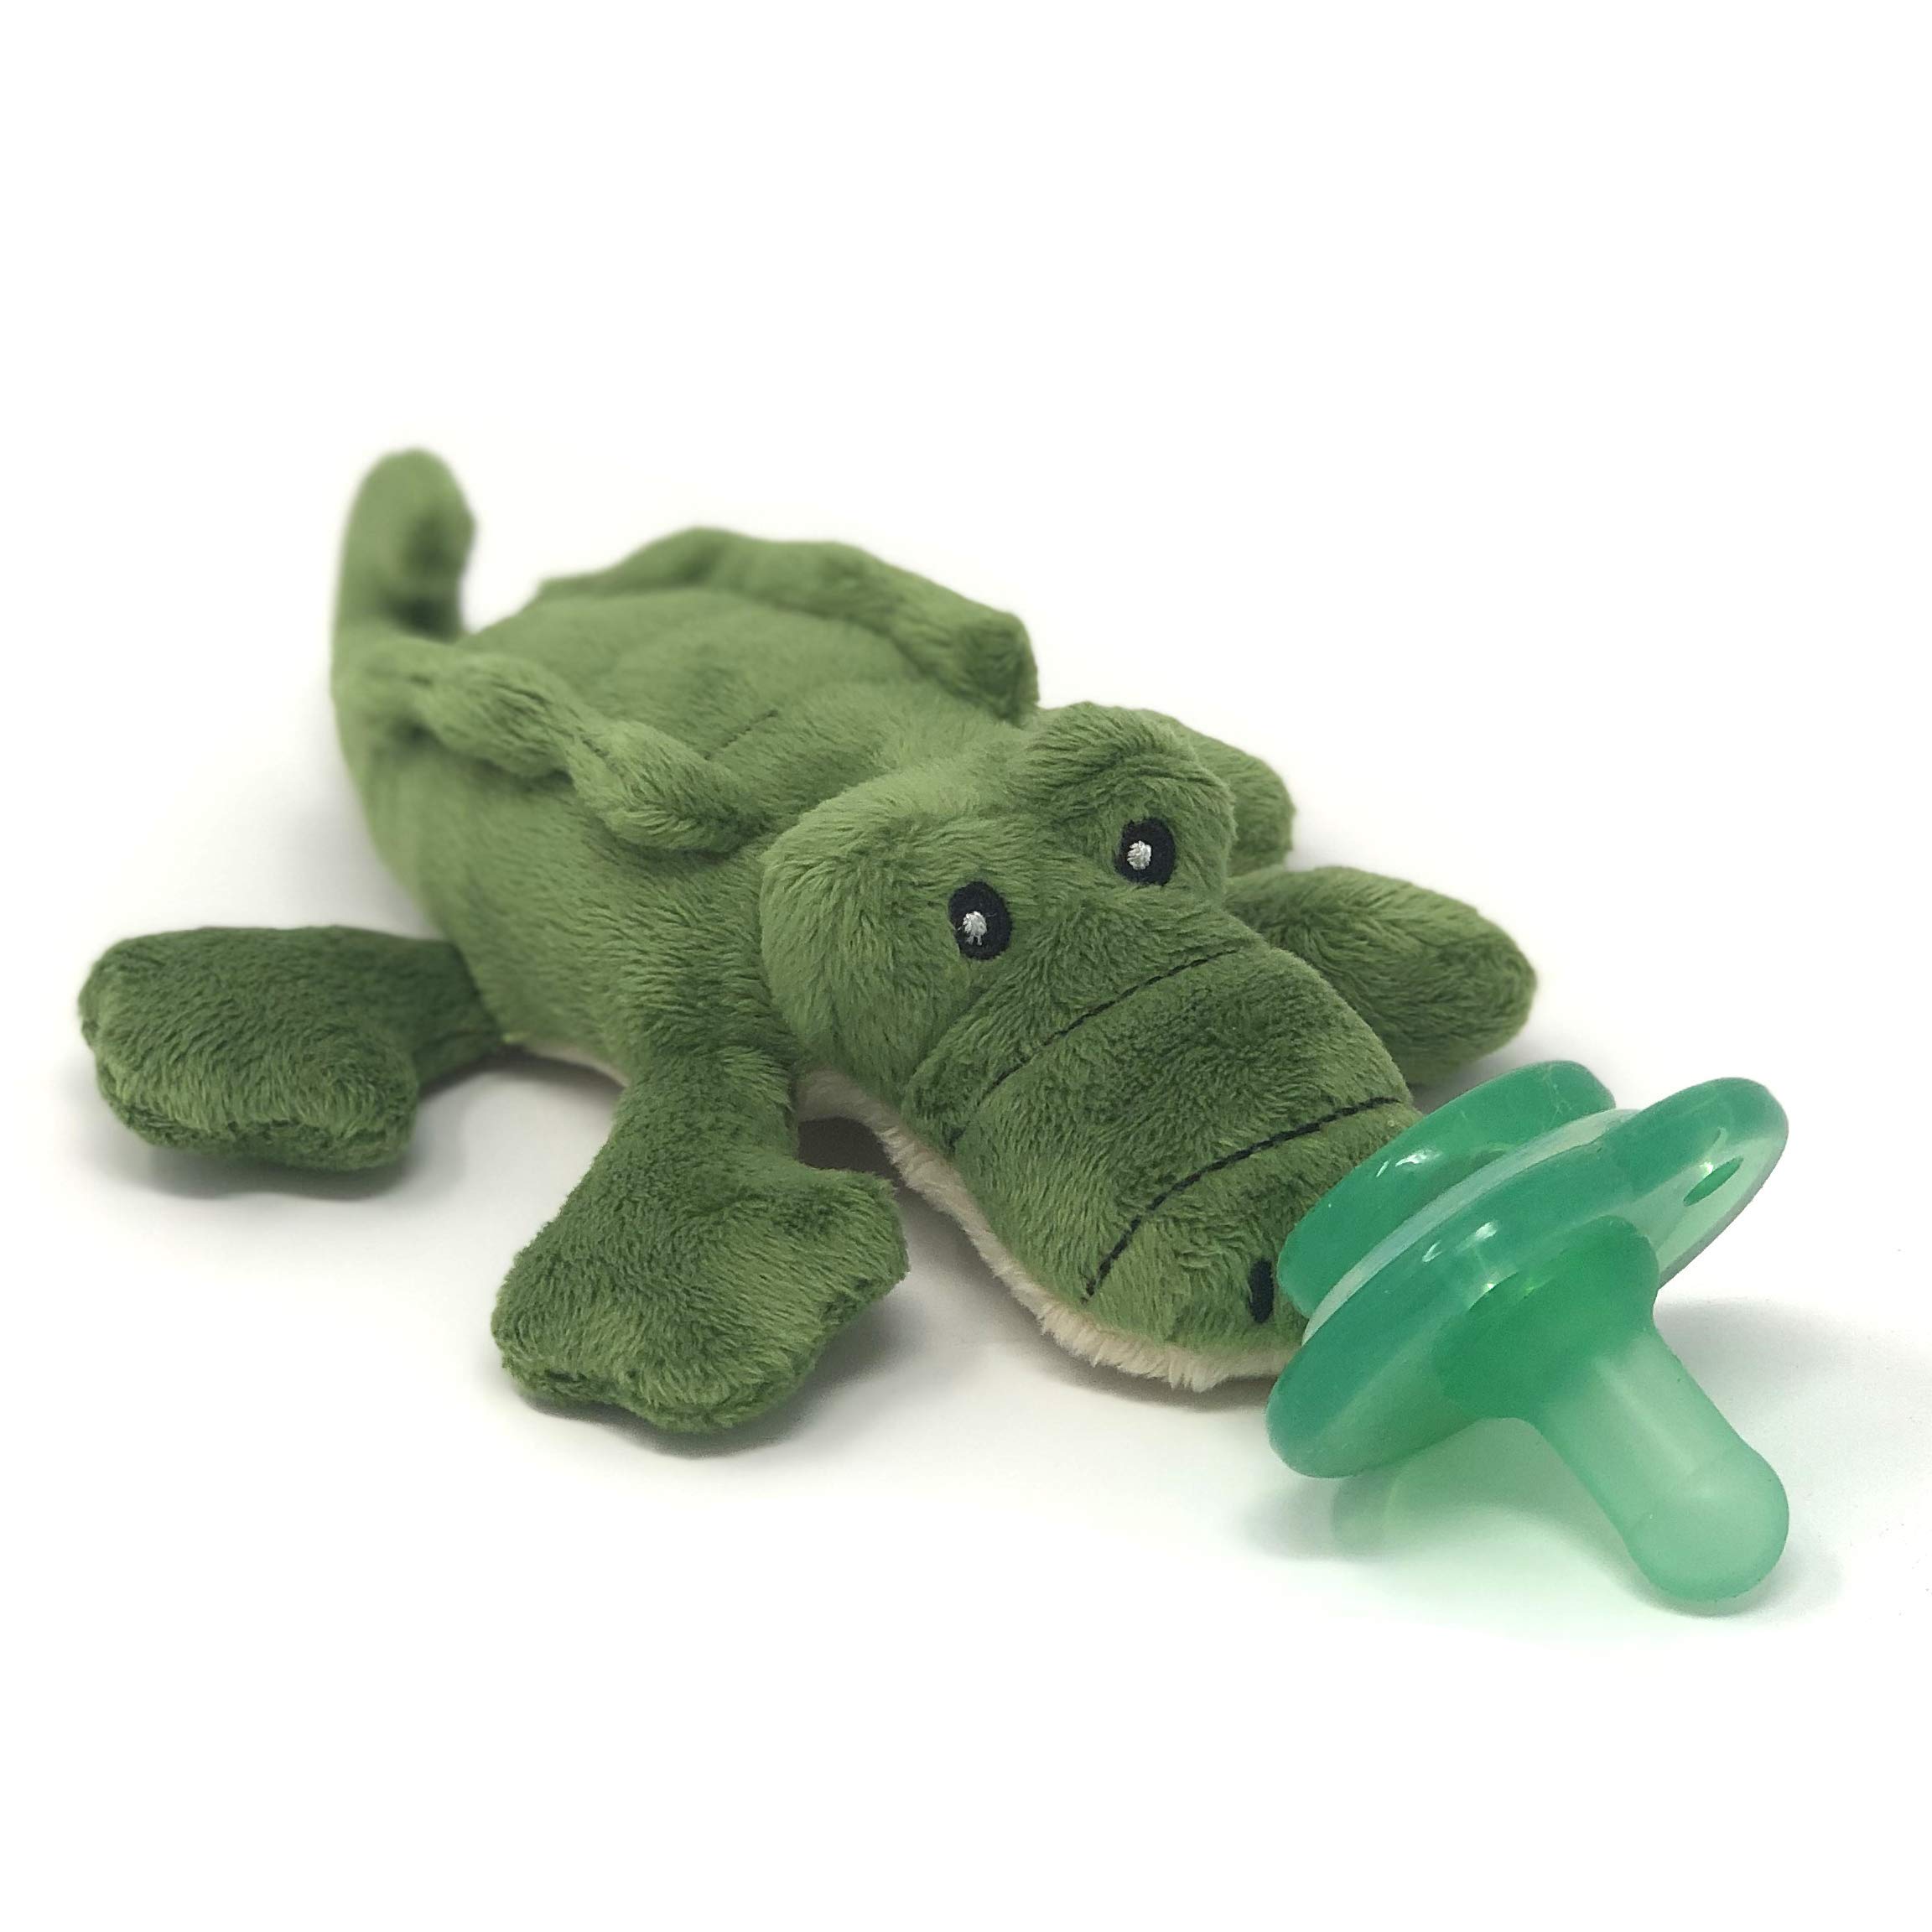 Book Cover Nookums Paci-Plushies Buddies - Alligator Pacifier Holder - Adapts to Name Brand Pacifiers, Suitable for All Ages, Plush Toy Includes Detachable Pacifier Alli the Alligator